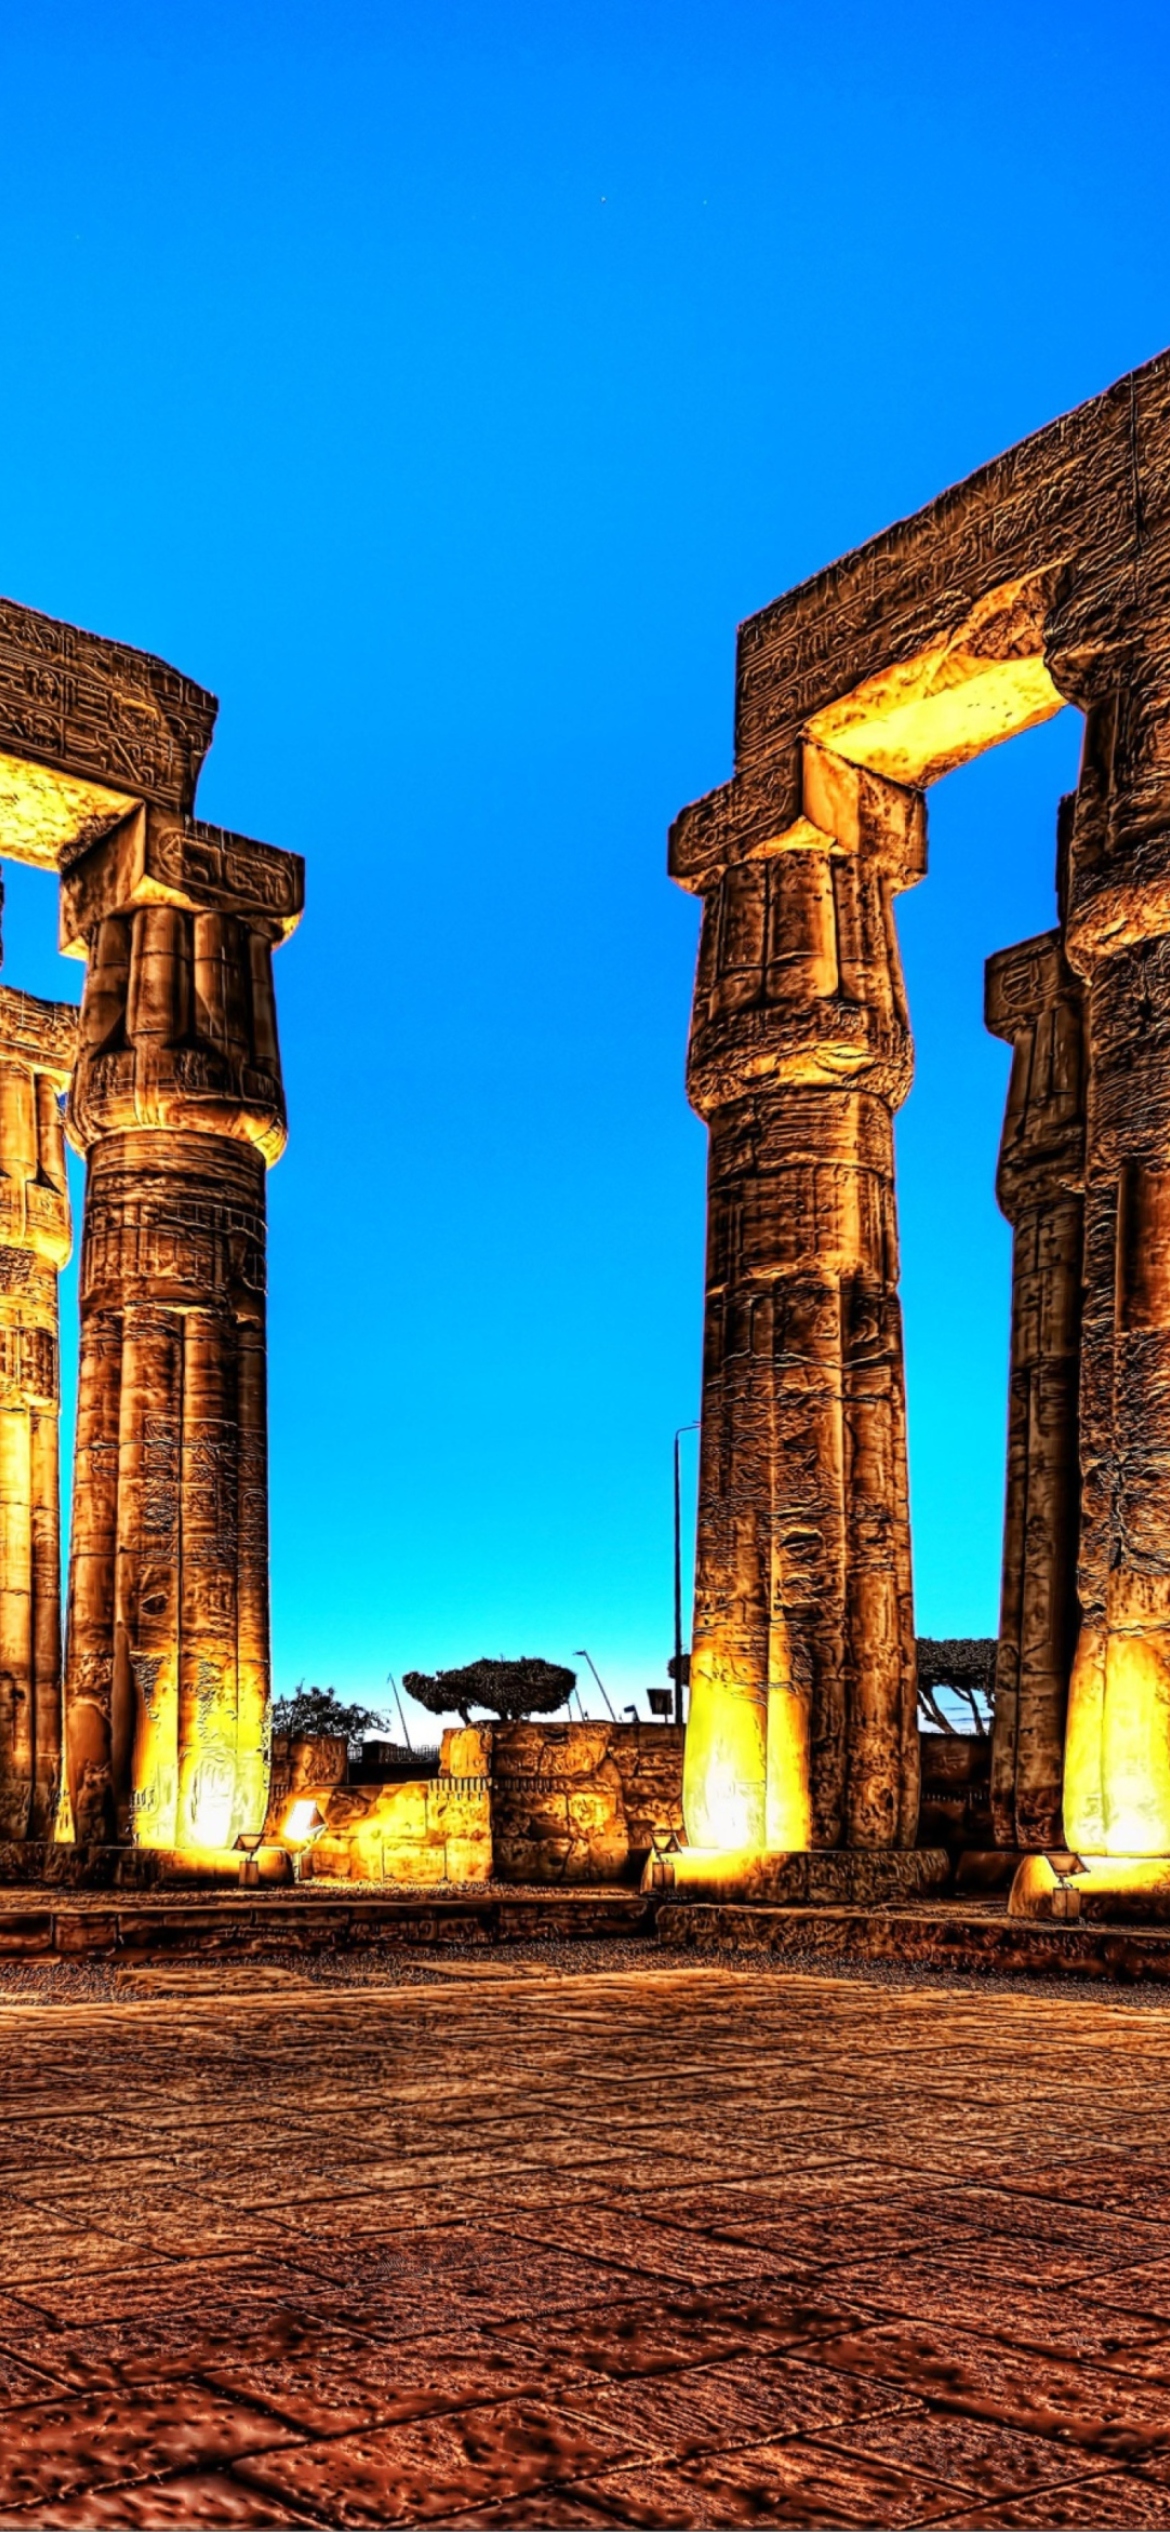 Luxor In Egypt Wallpaper for iPhone 12 Pro